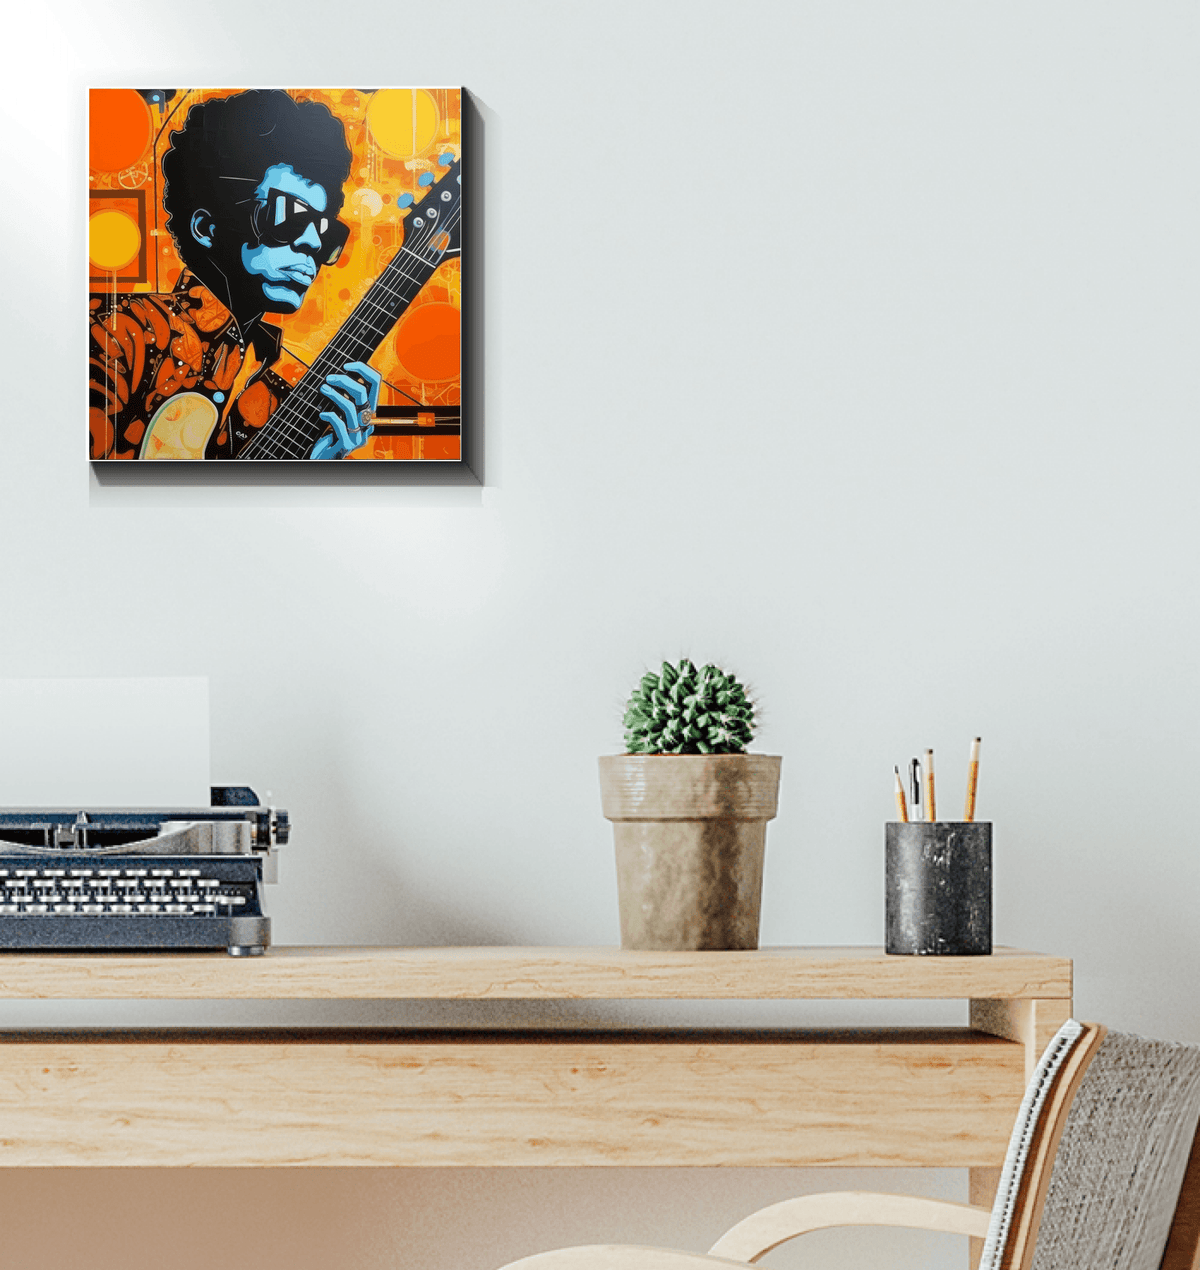 Pop Music Themed Wrapped Canvas Artwork for Musicians.